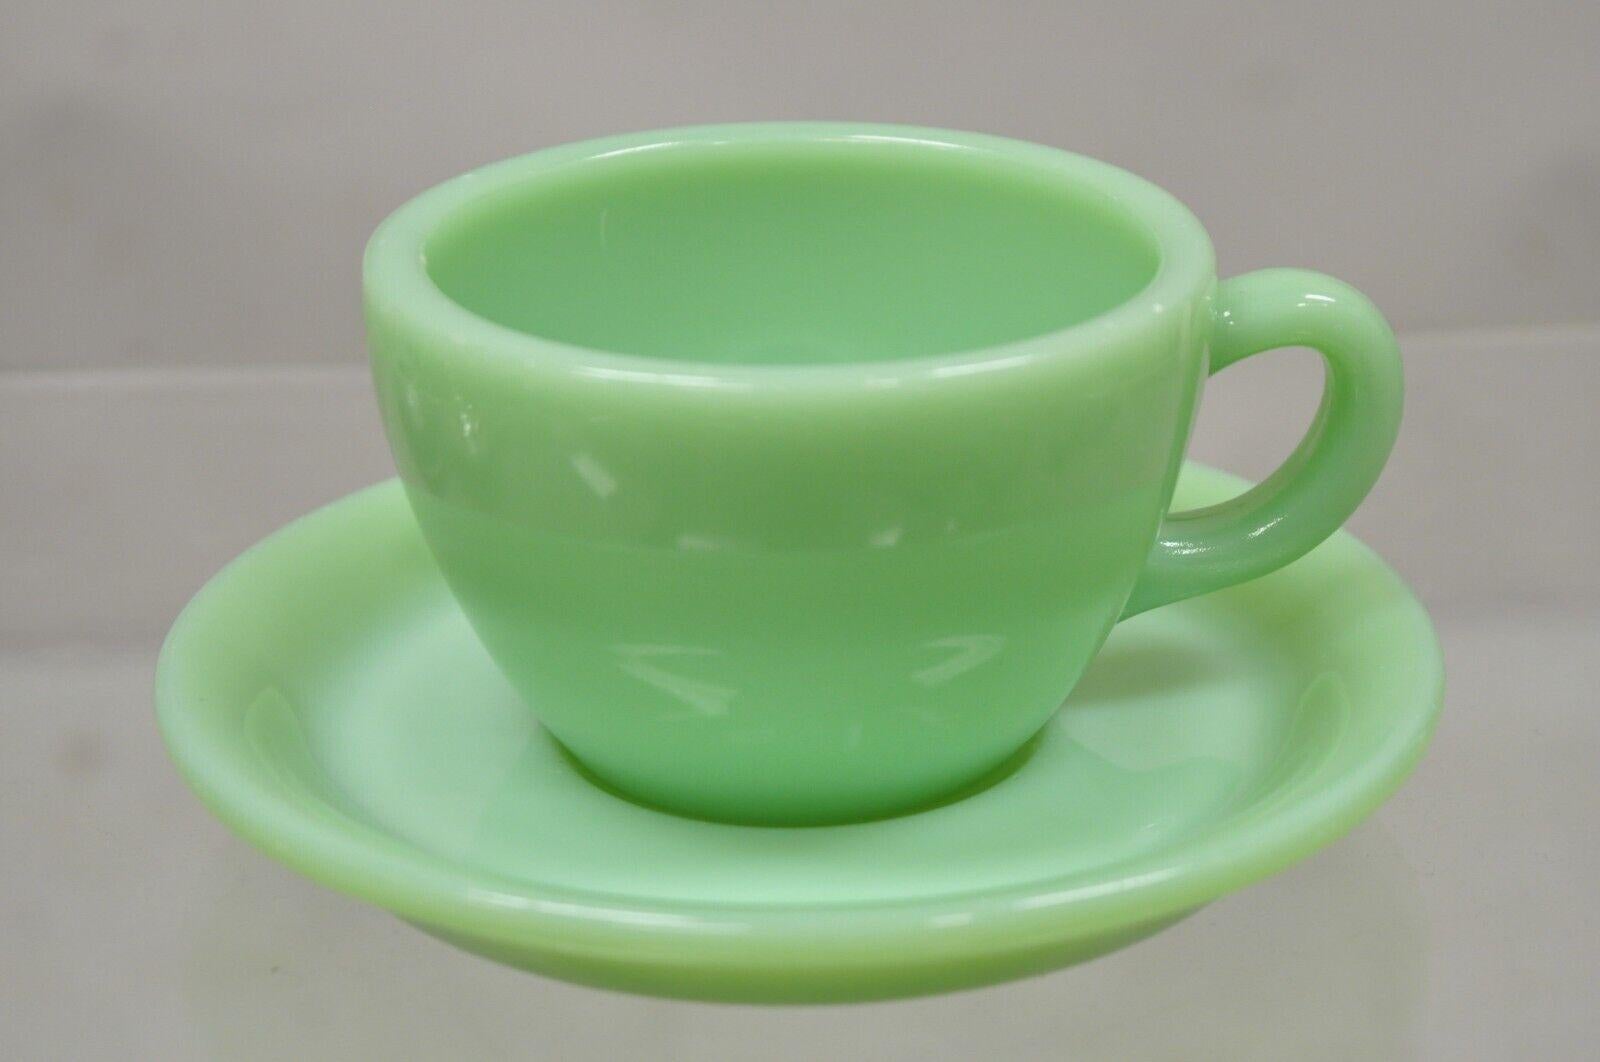 Vintage Fire King Jadeite Green Oven Ware Coffee Cup and Saucer with Damage 2